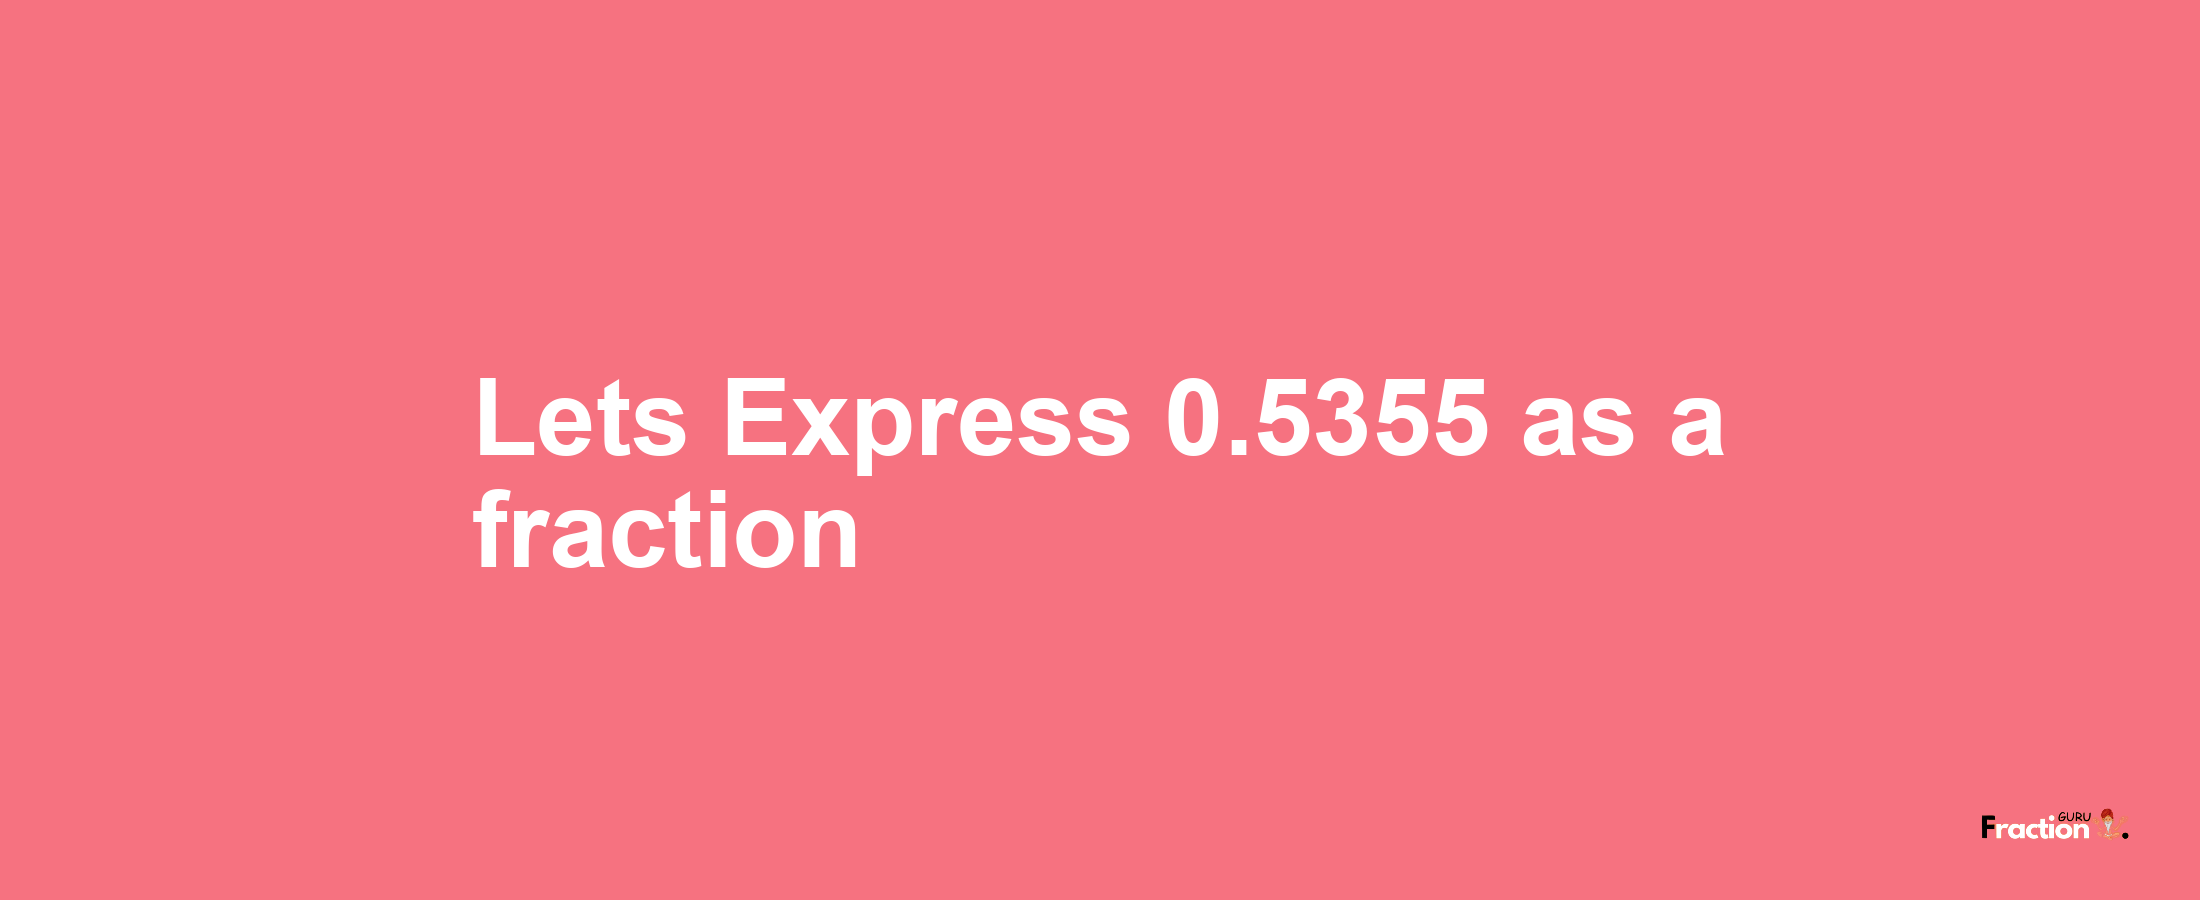 Lets Express 0.5355 as afraction